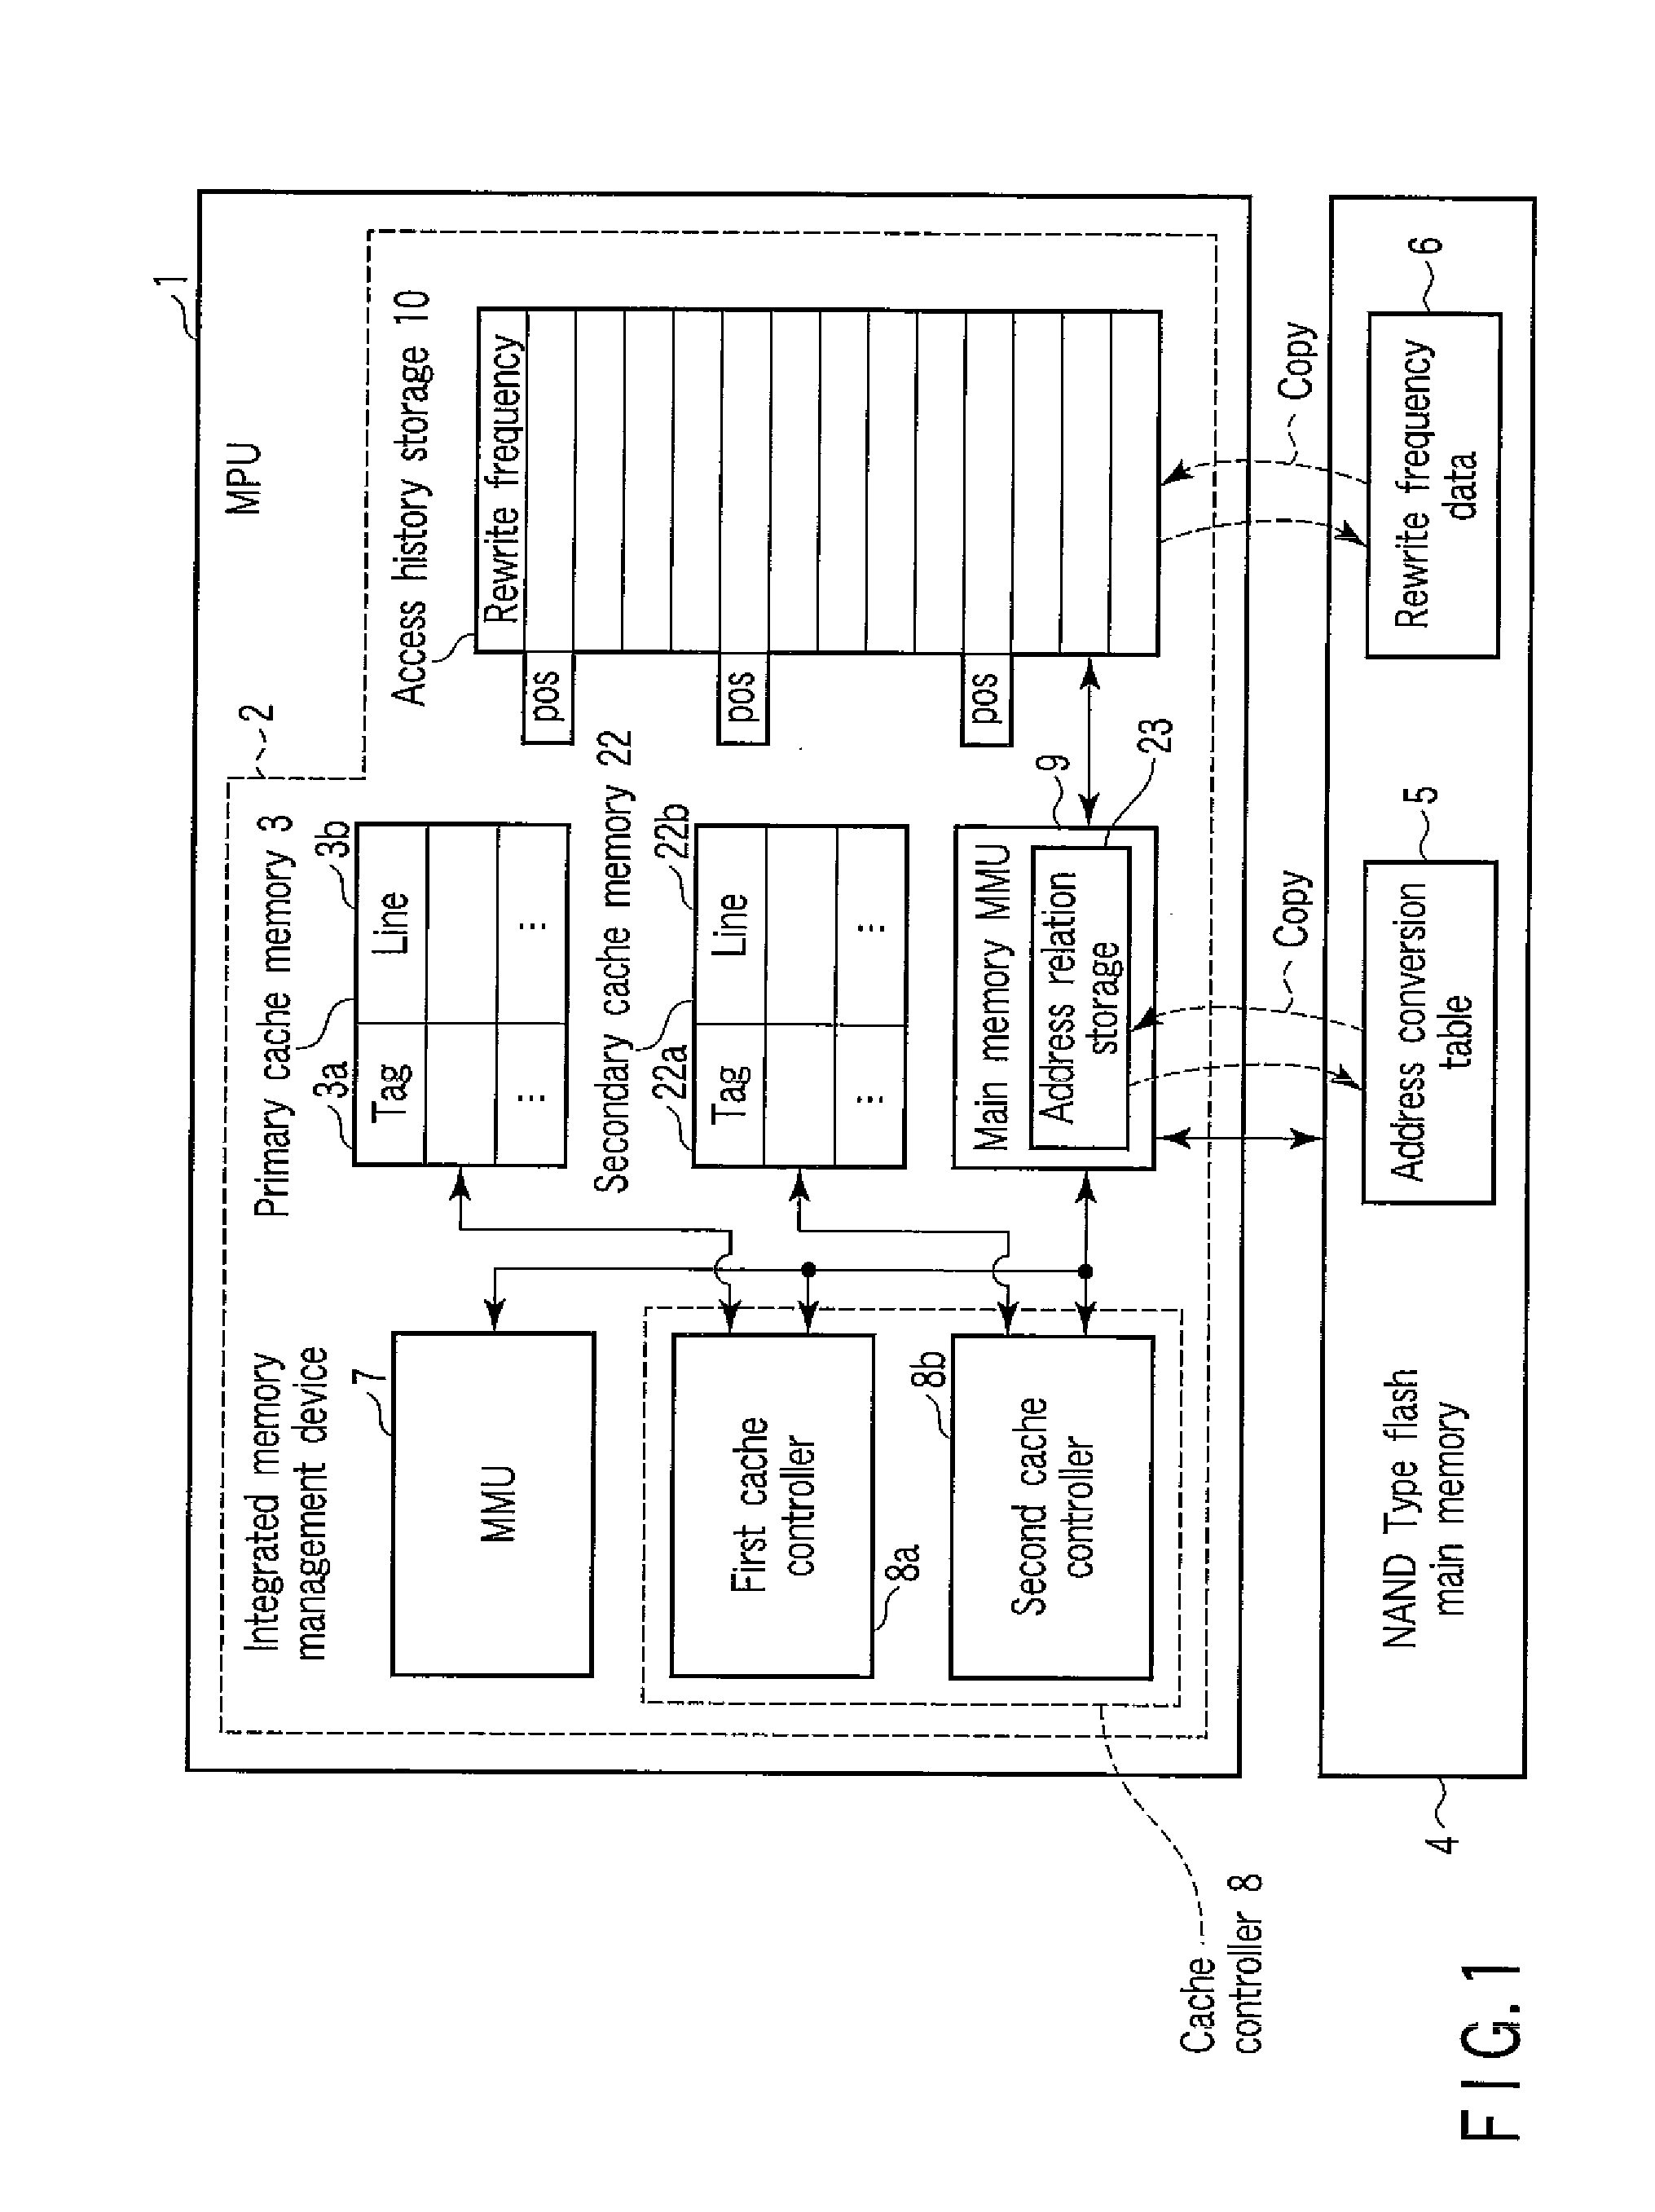 Integrated memory management and memory management method